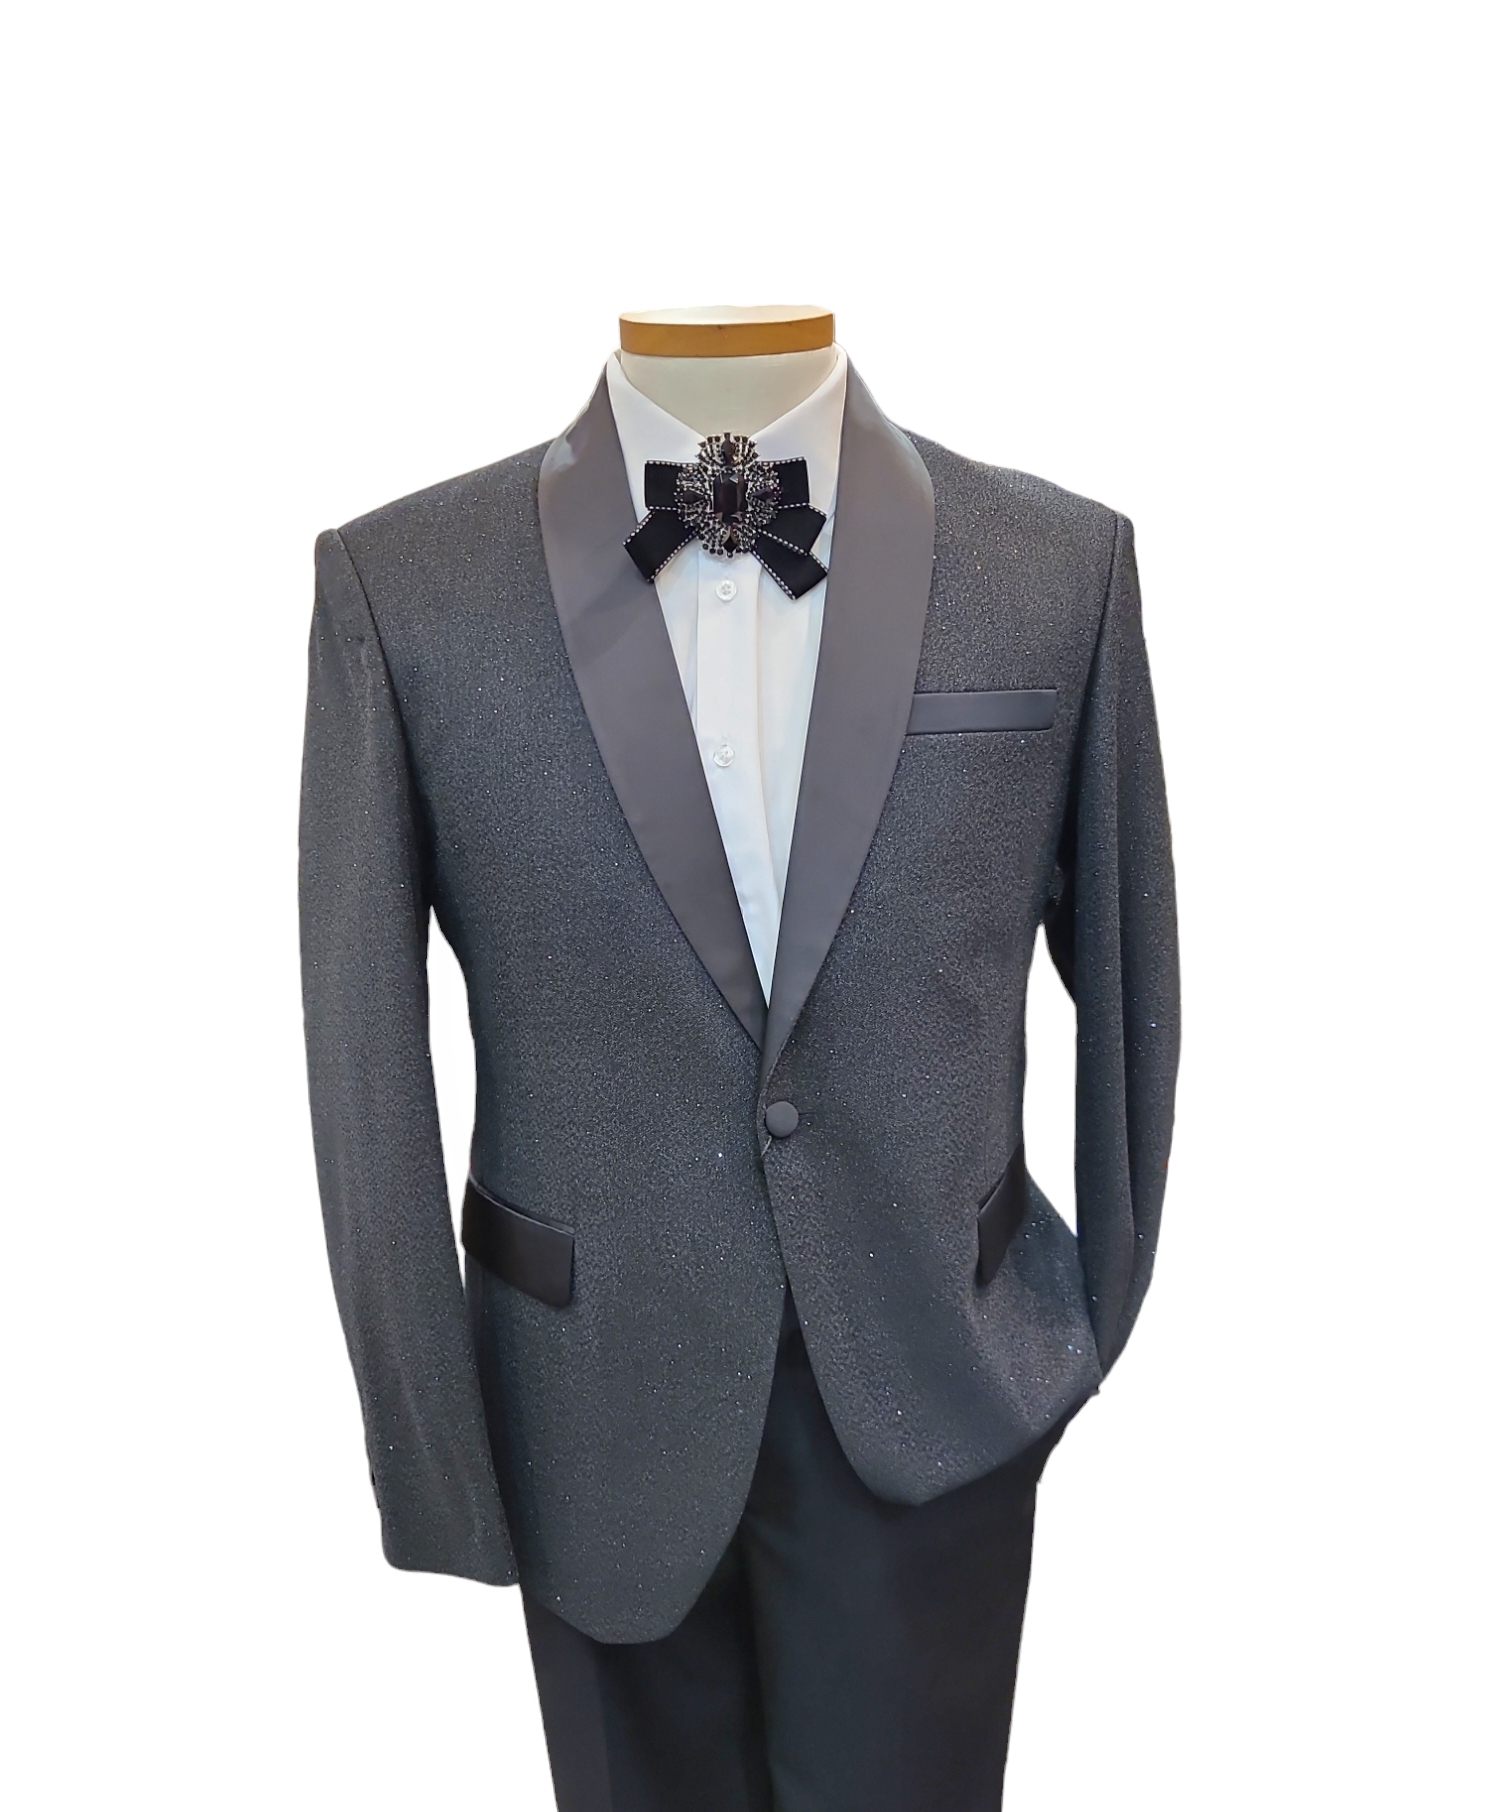 Slim Fit One Button Formal Jacket